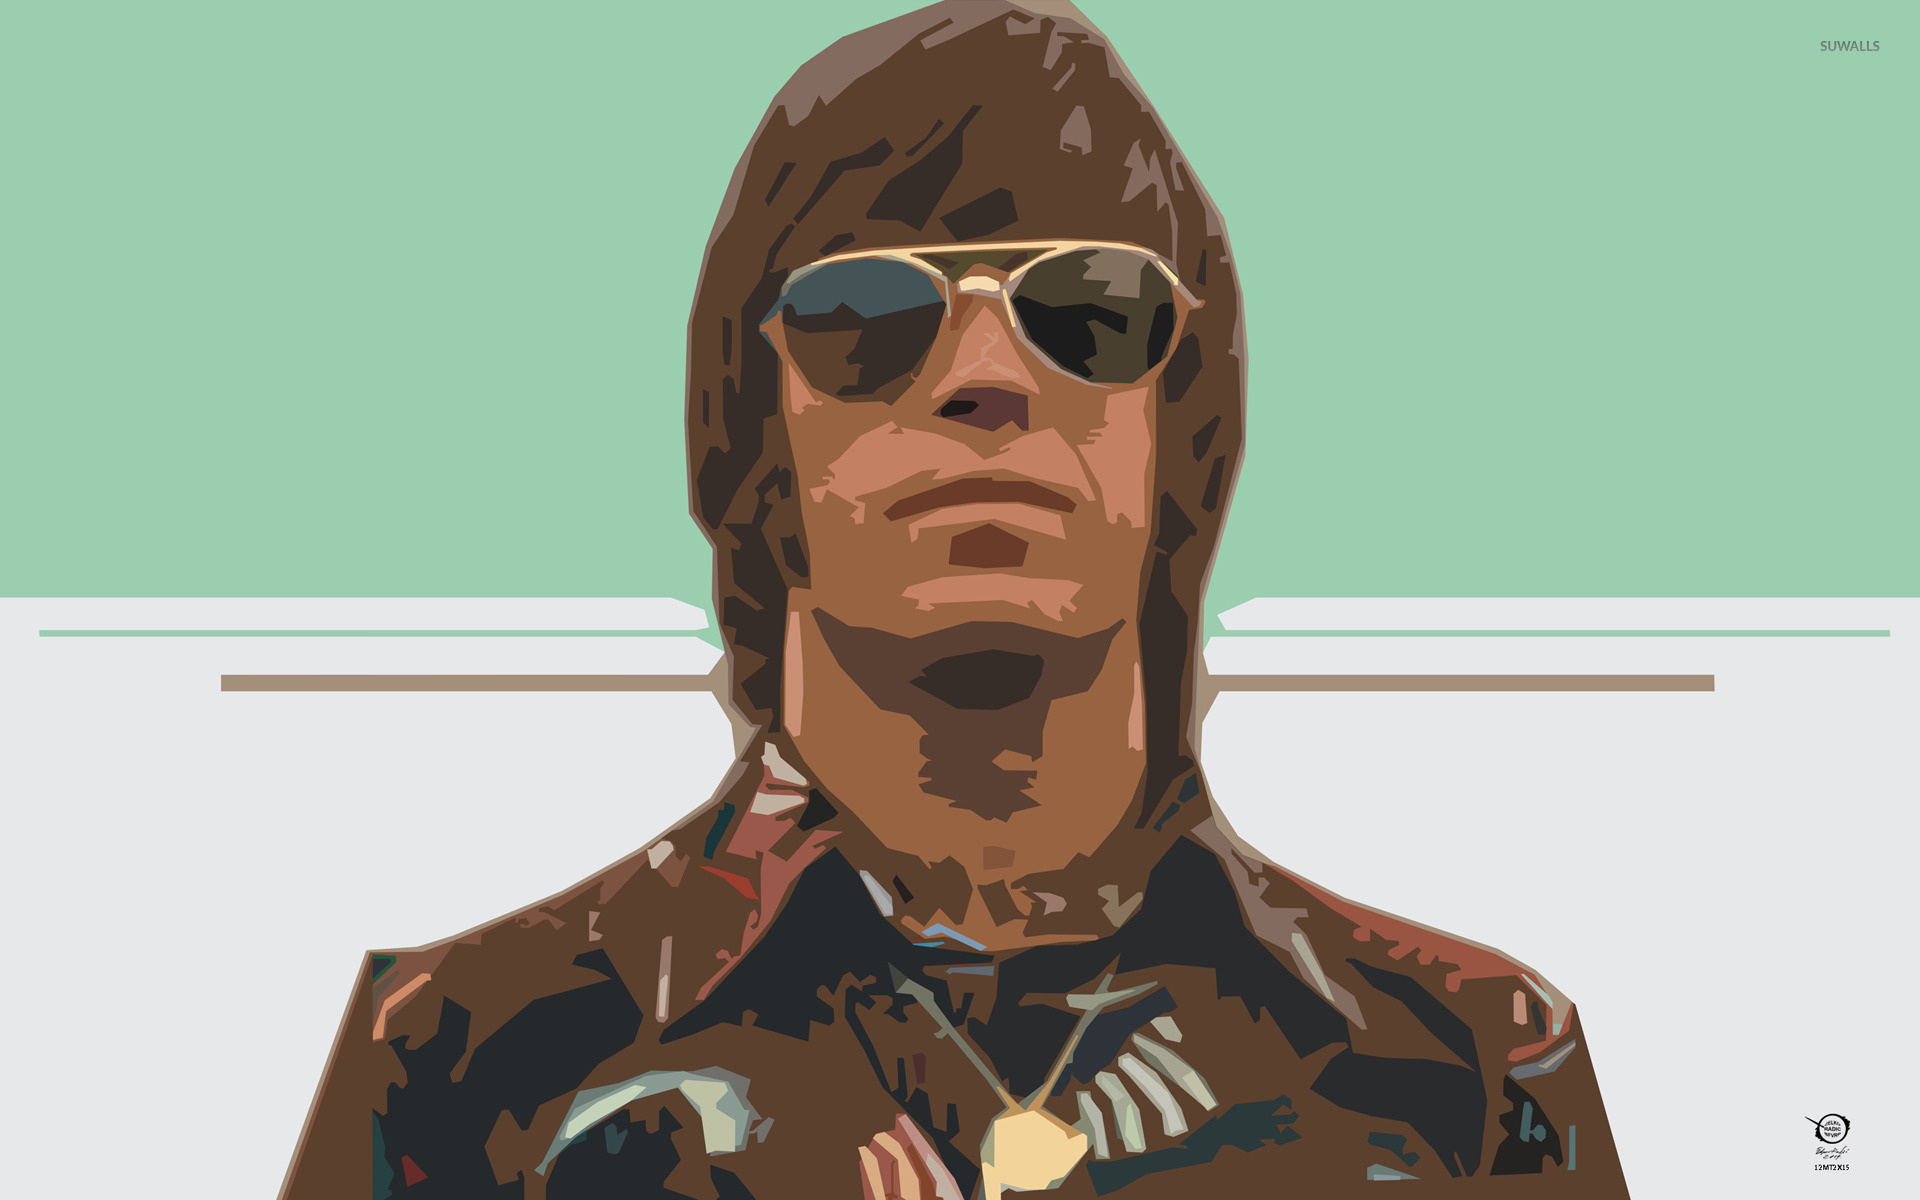 Chuck Norris with sunglasses wallpaper 1920x1080. 